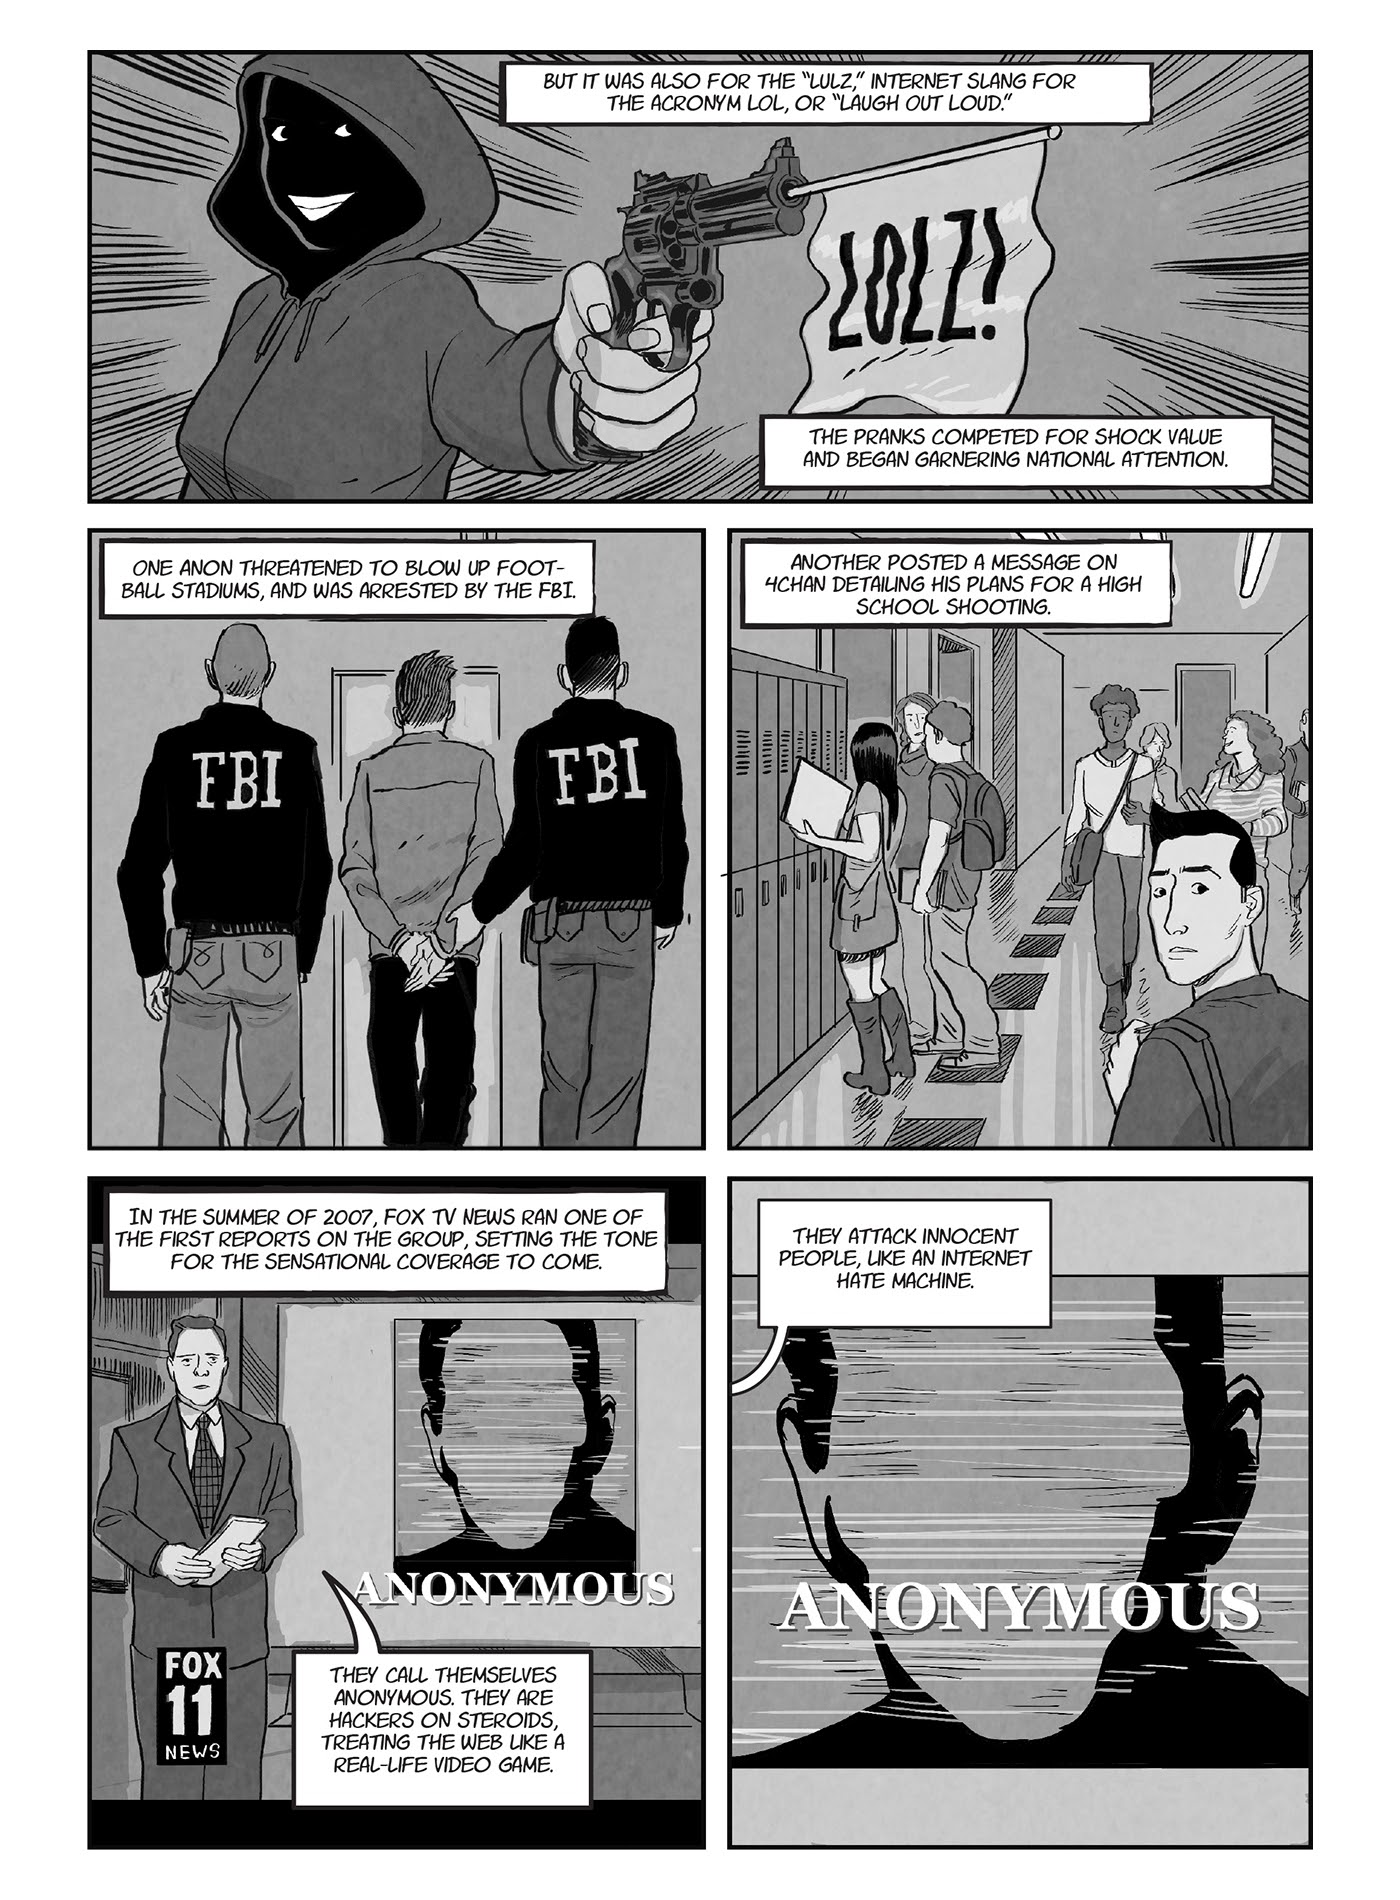 Read online A for Anonymous: How a Mysterious Hacker Collective Transformed the World comic -  Issue # TPB - 29